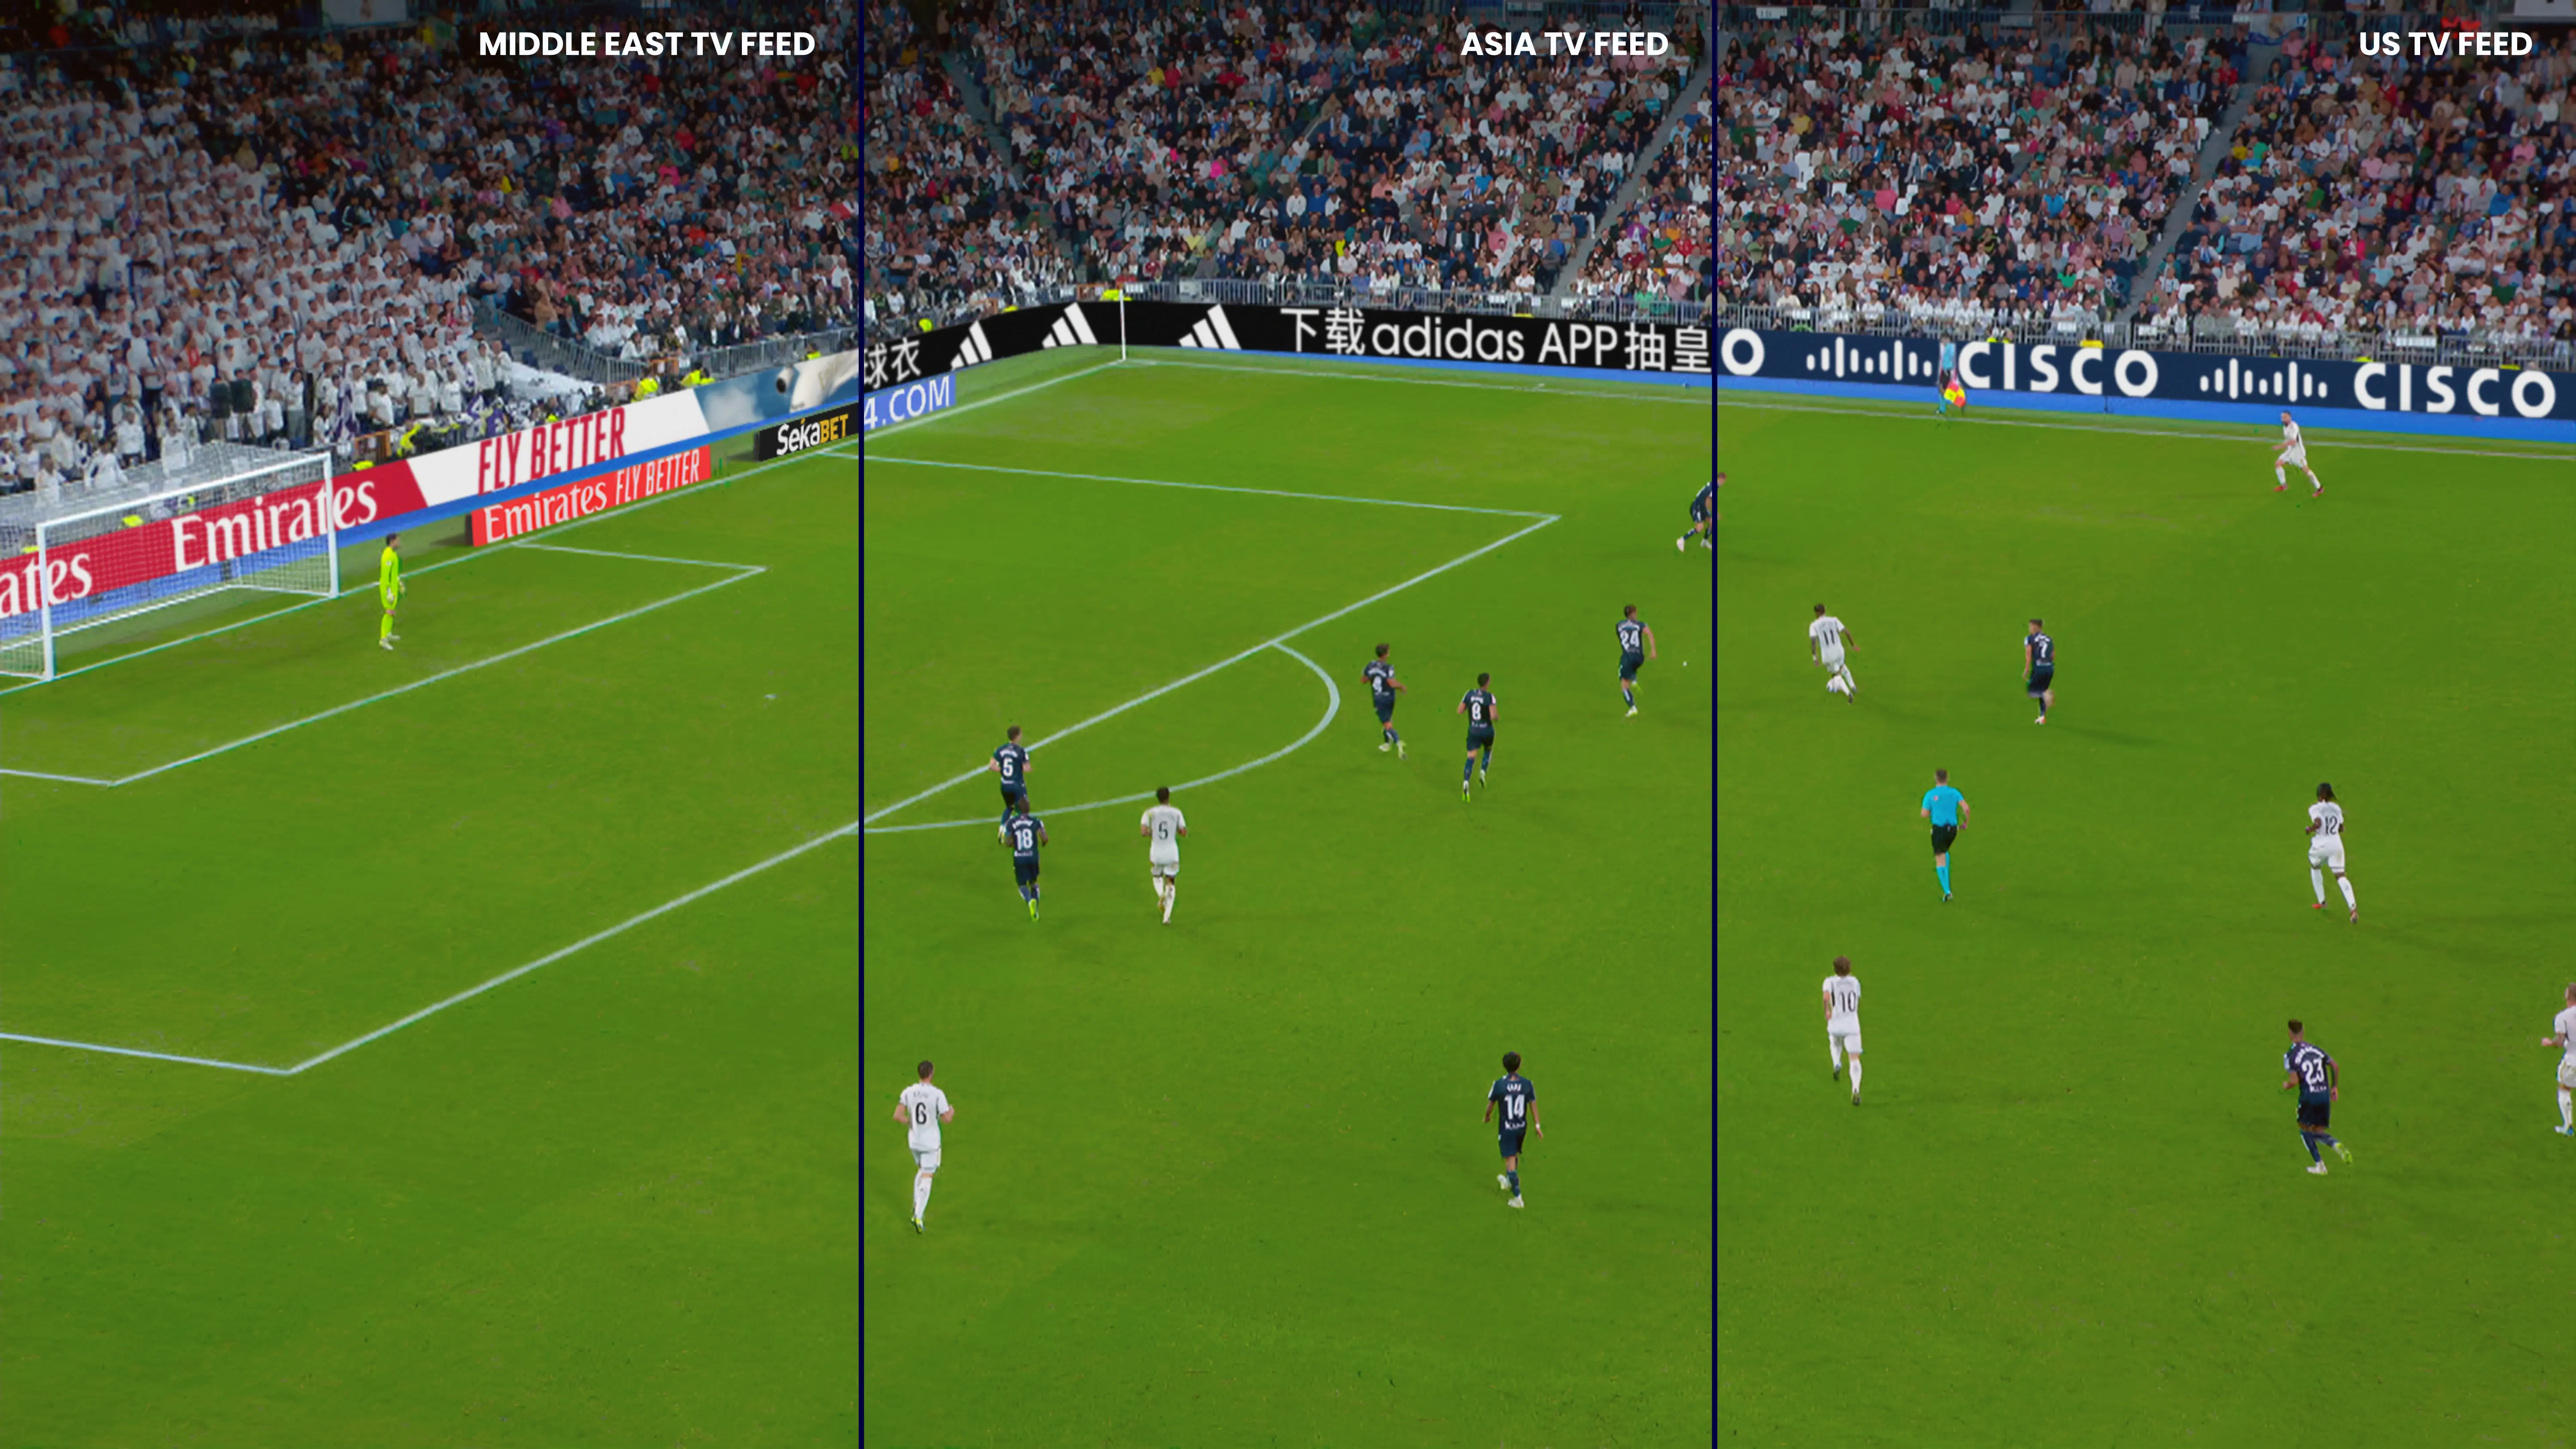 Digital Overlay showing advertising in a football match